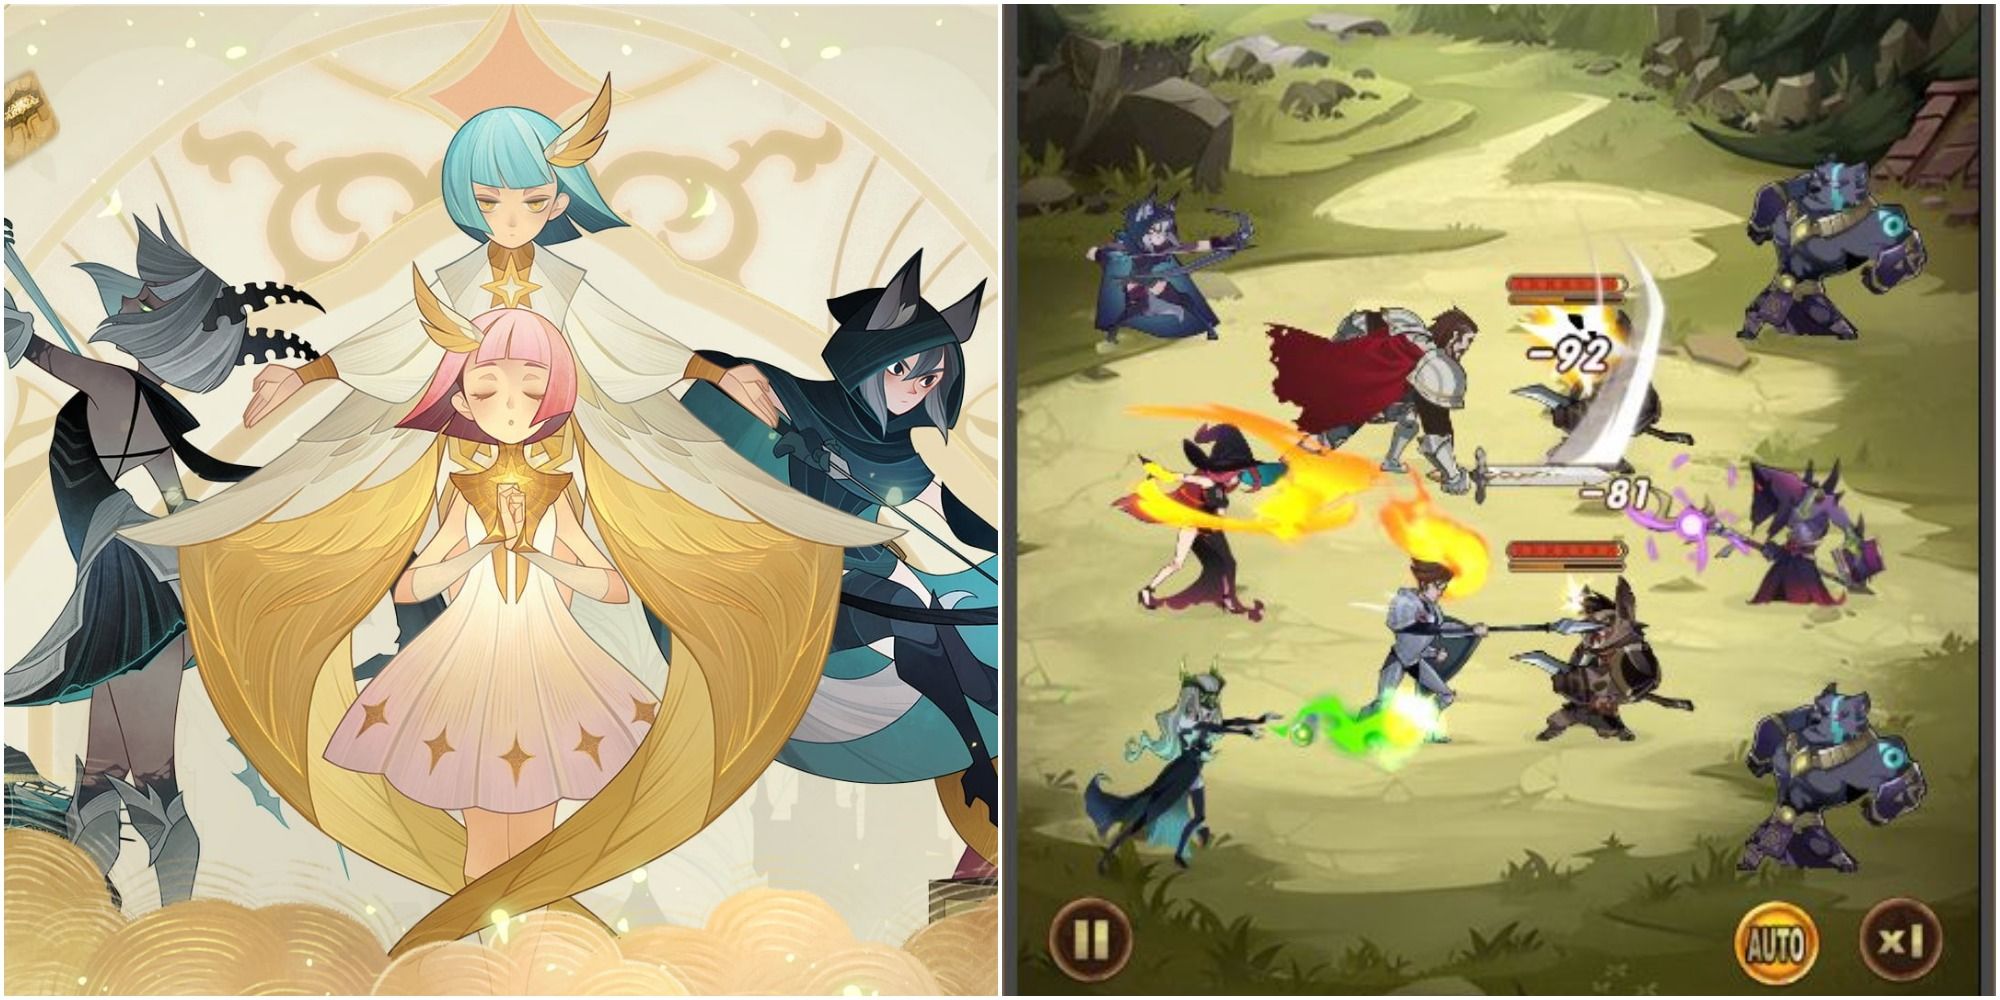 A split image of characters from AFK Arena posing and characters from AFK arena battling on a field